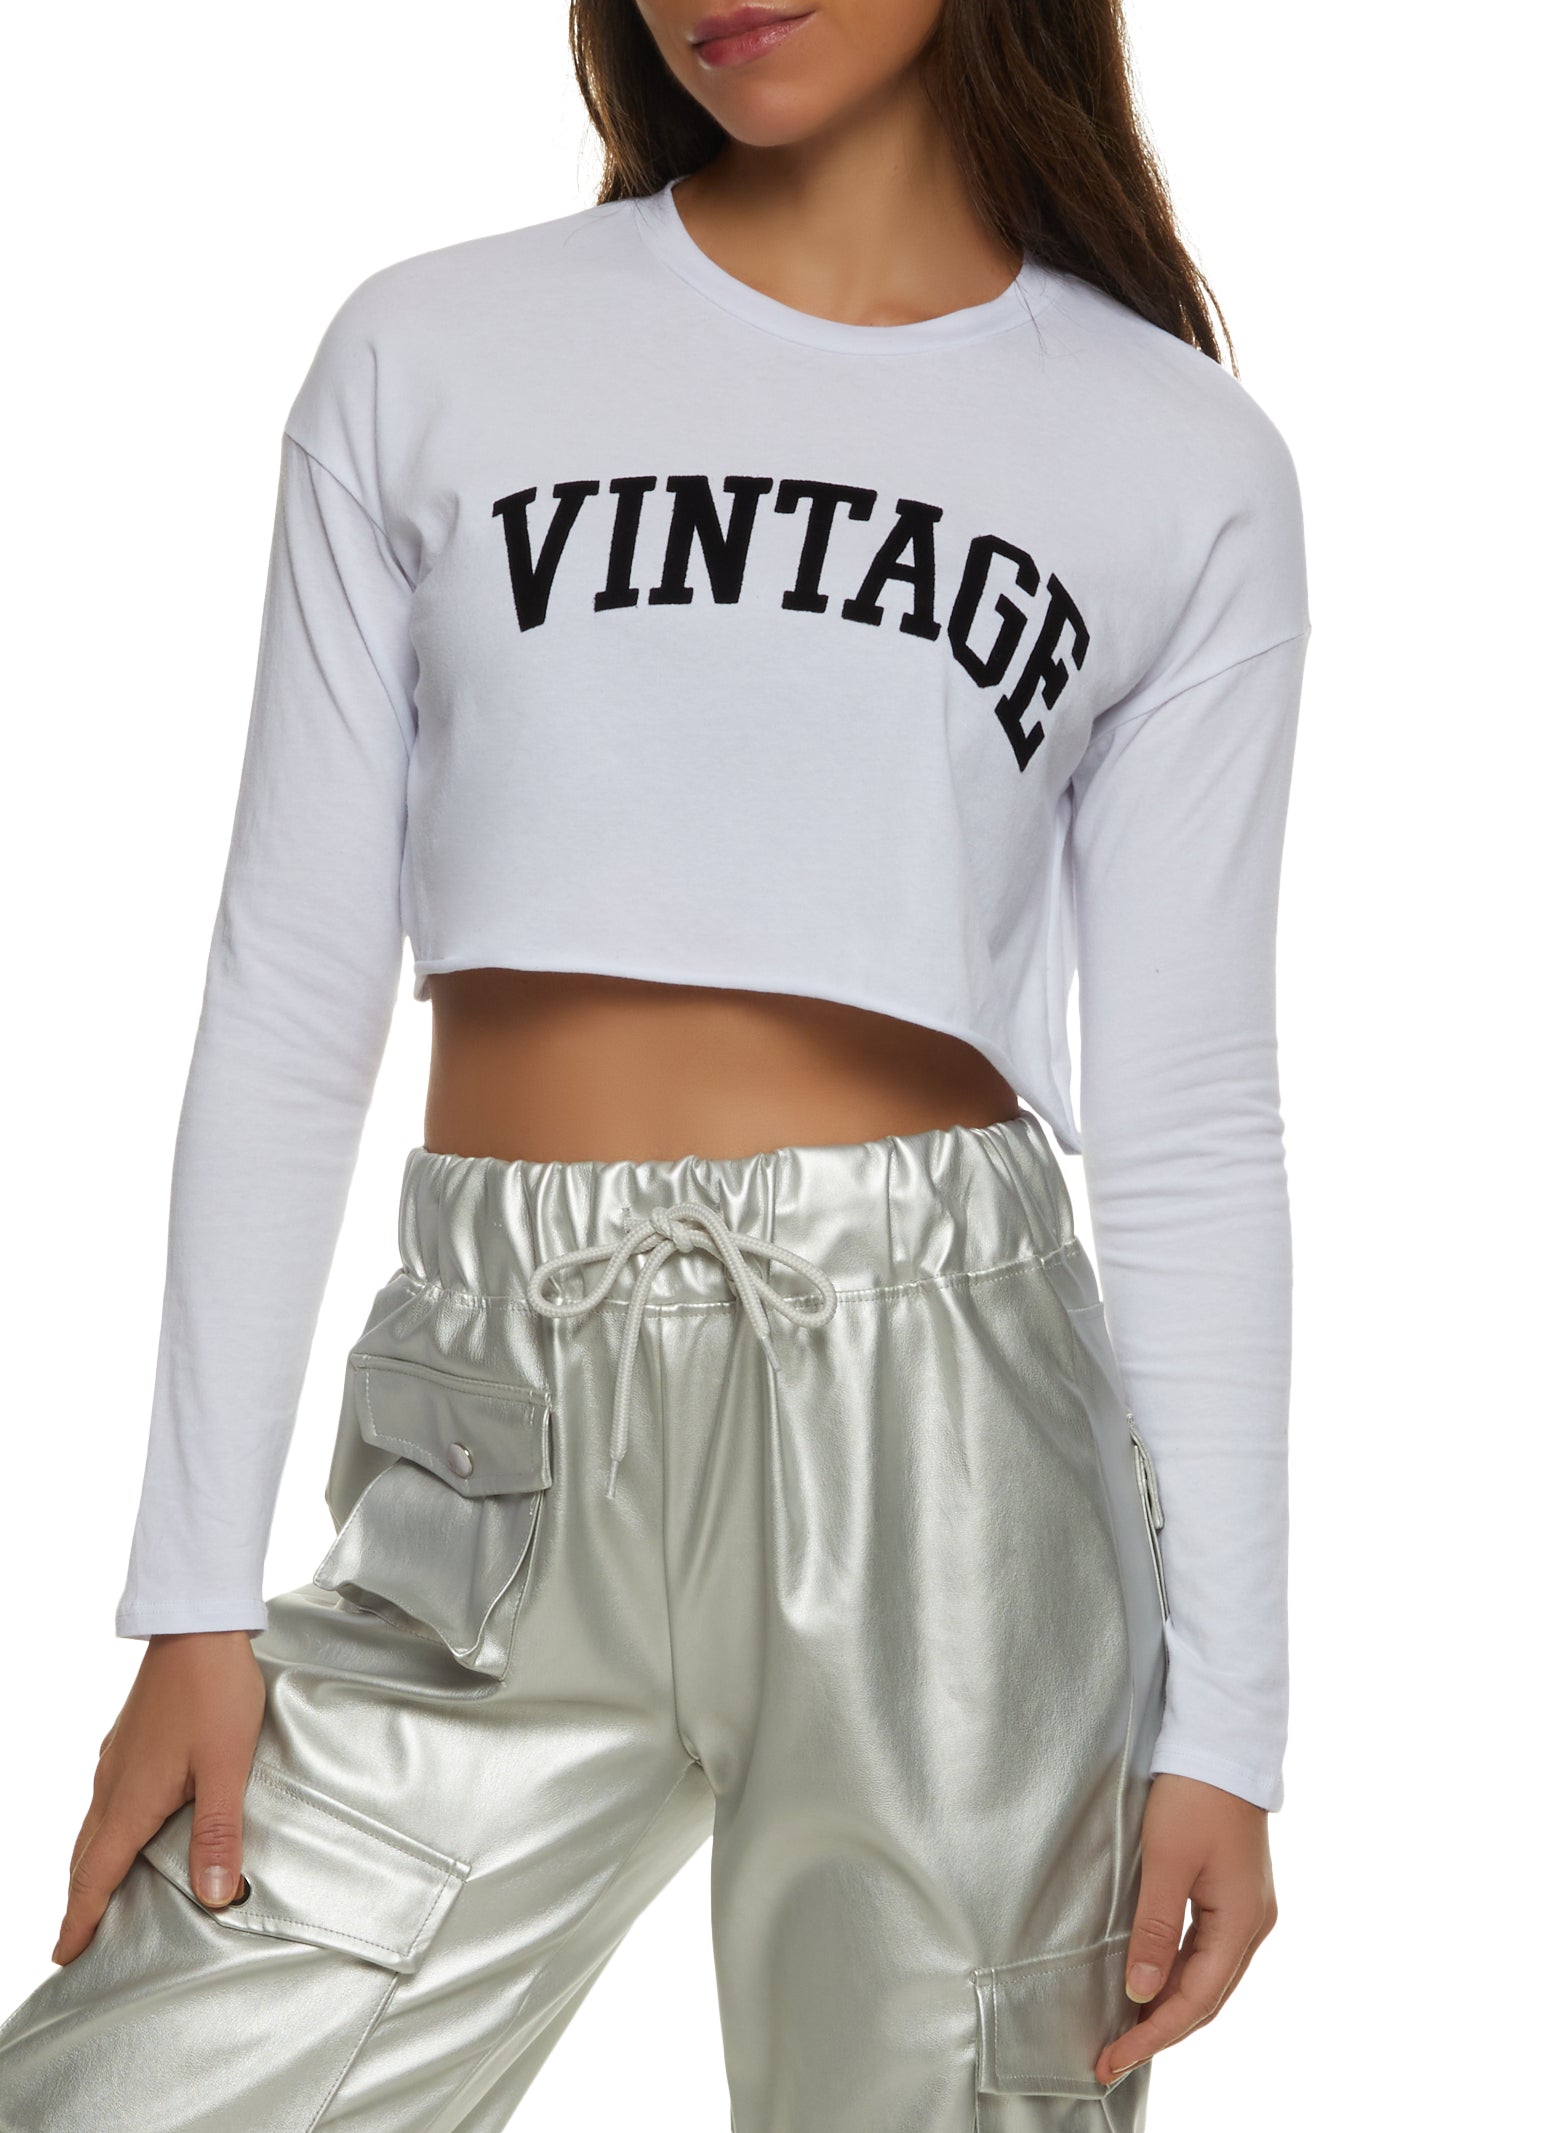 Womens Vintage Cropped Graphic Tee, White, Size M